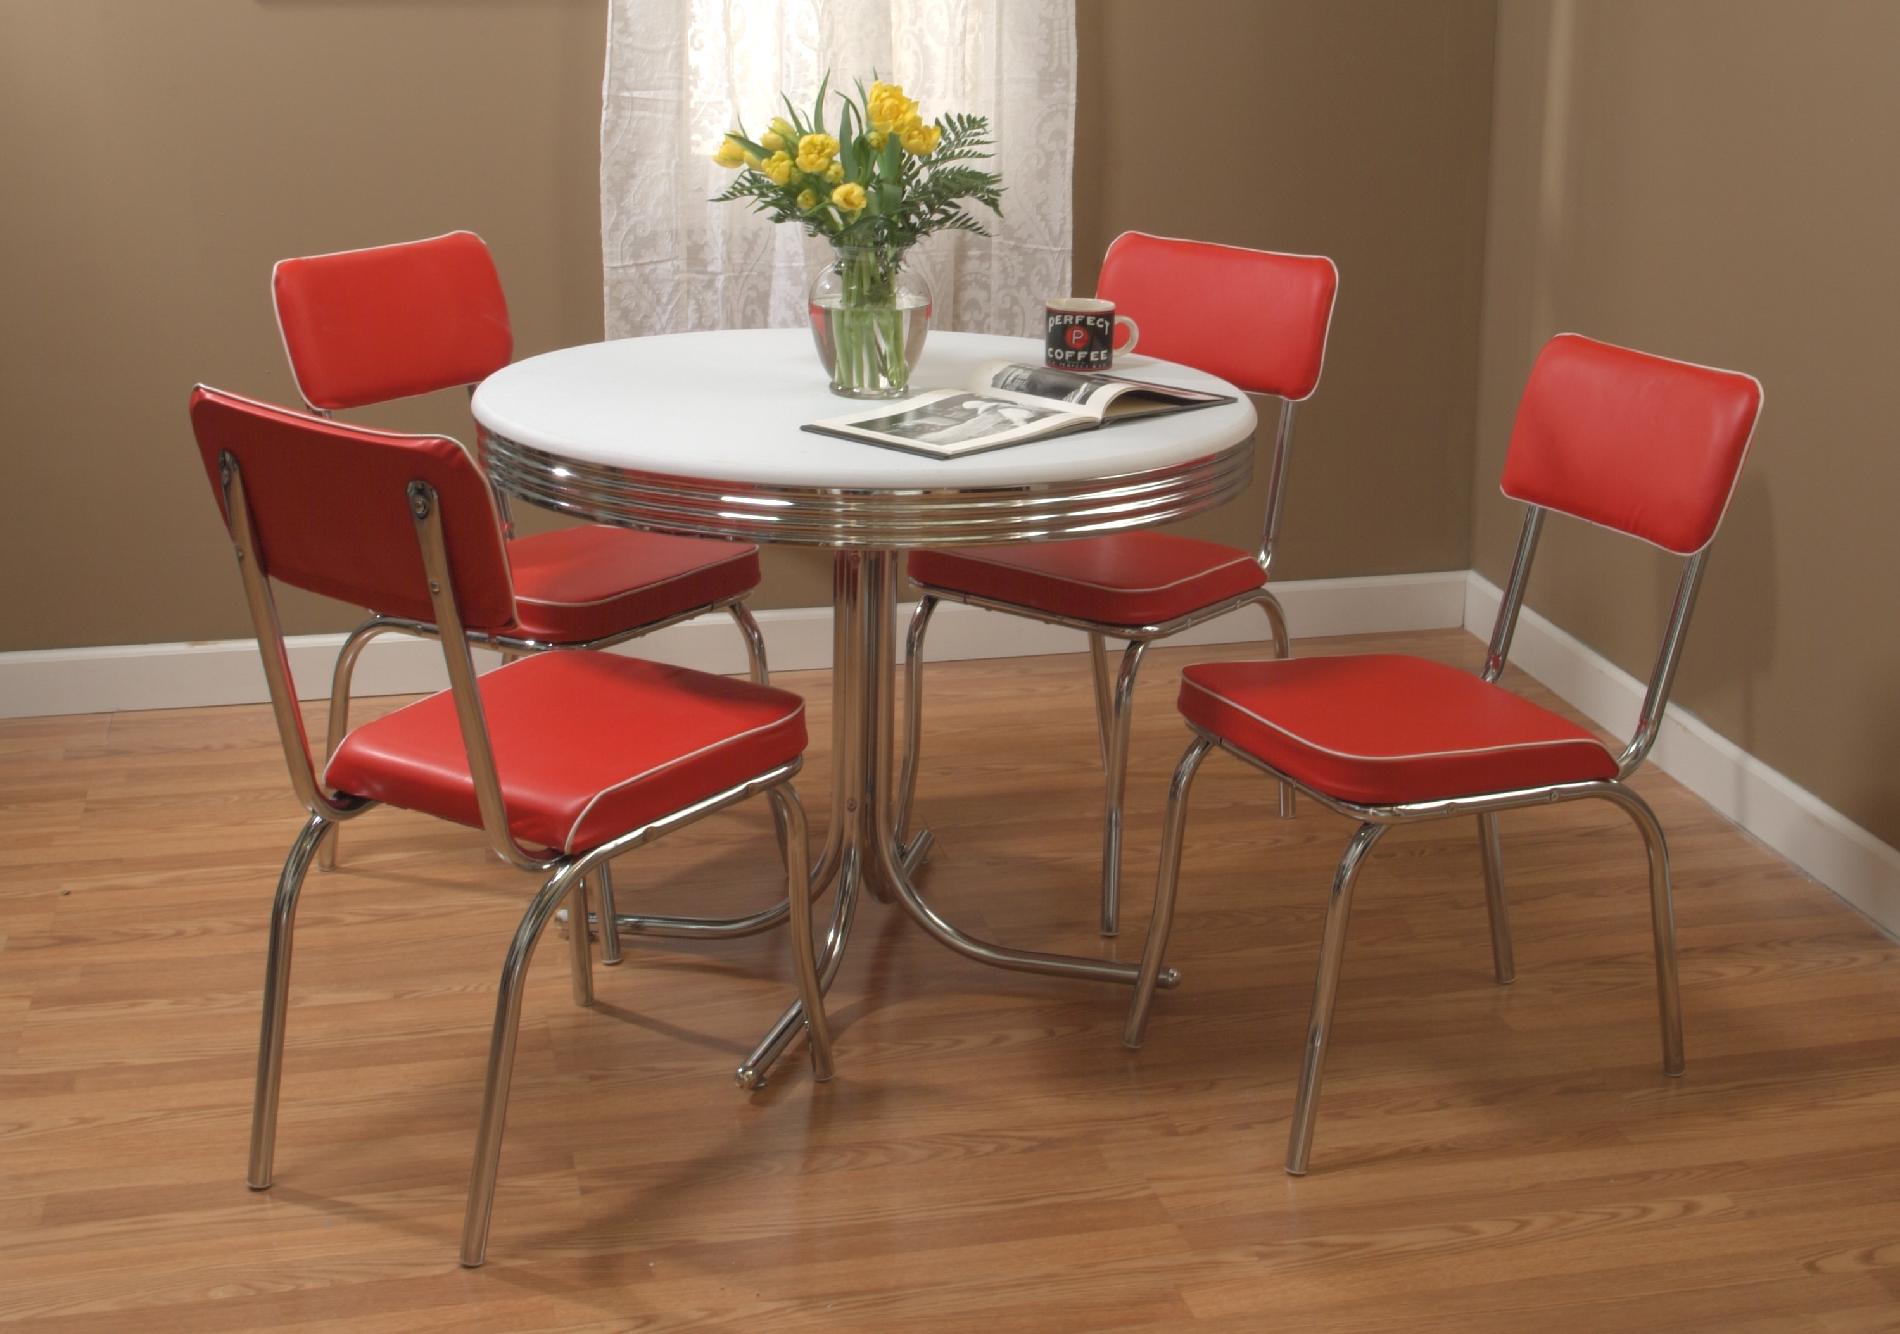 5pc. Retro Dining Set in Red